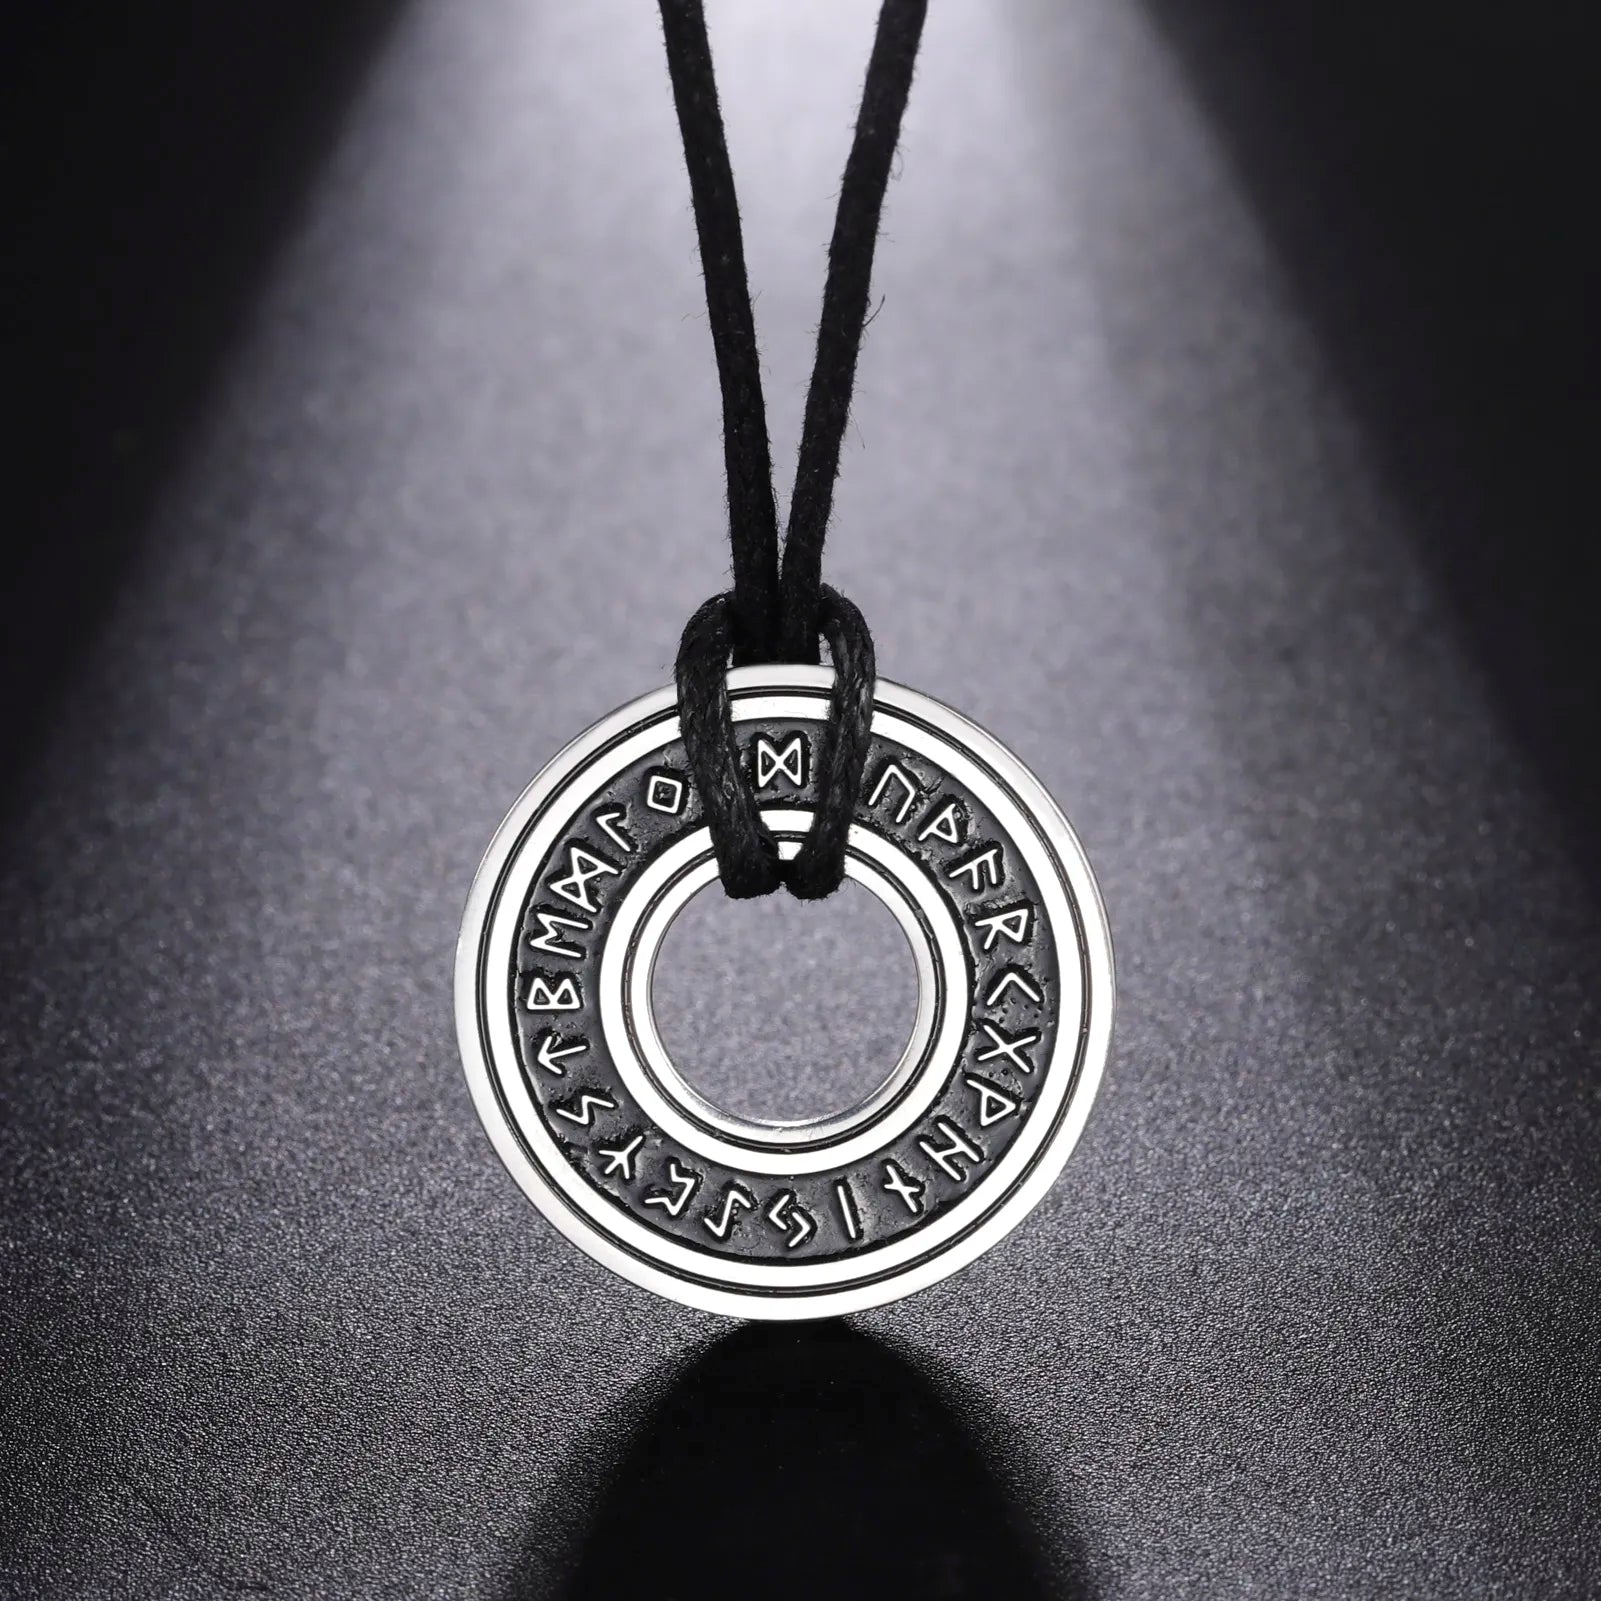 Norse Rune Necklace - Vintage Stainless Steel Pendant for Men Men's Necklace